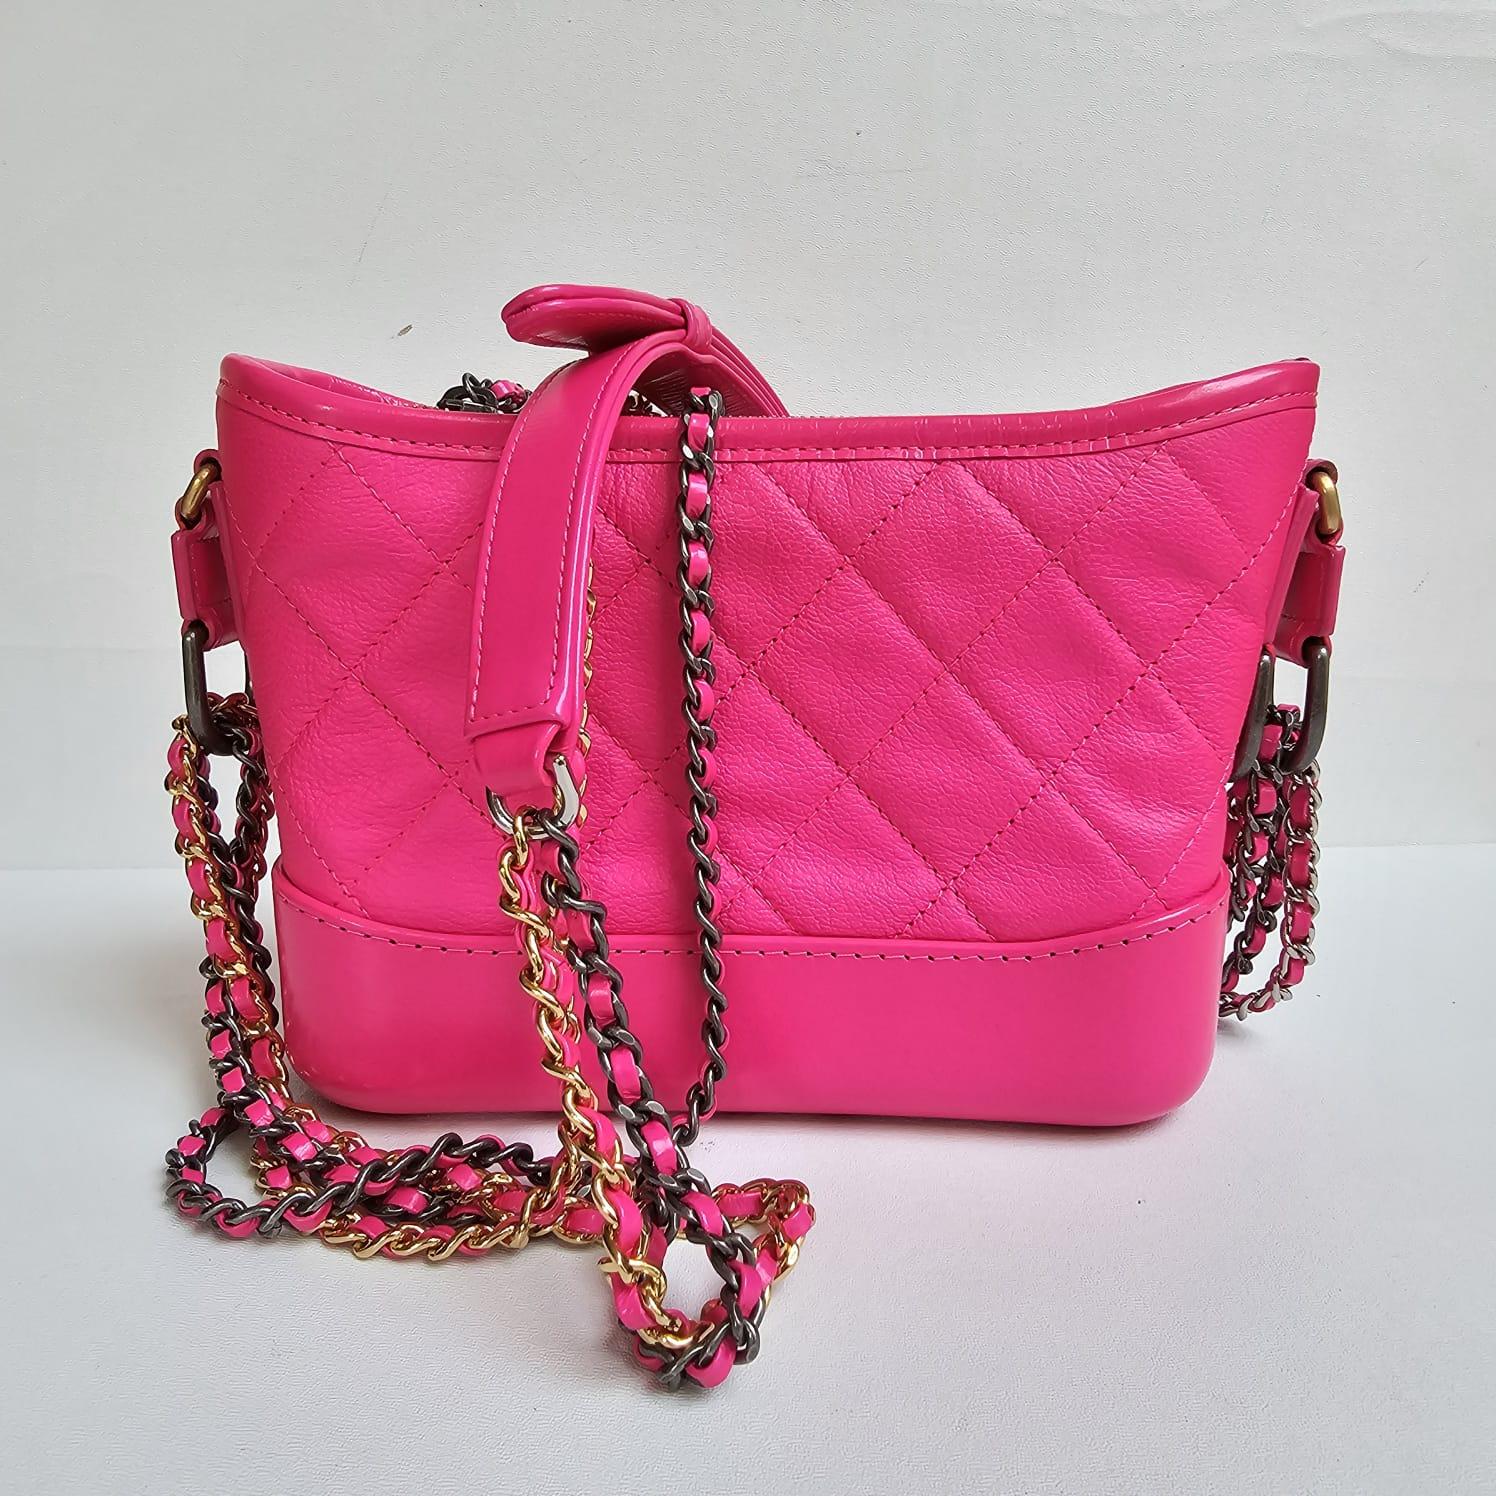 Chanel Neon Pink Small Gabrielle Bag For Sale 8